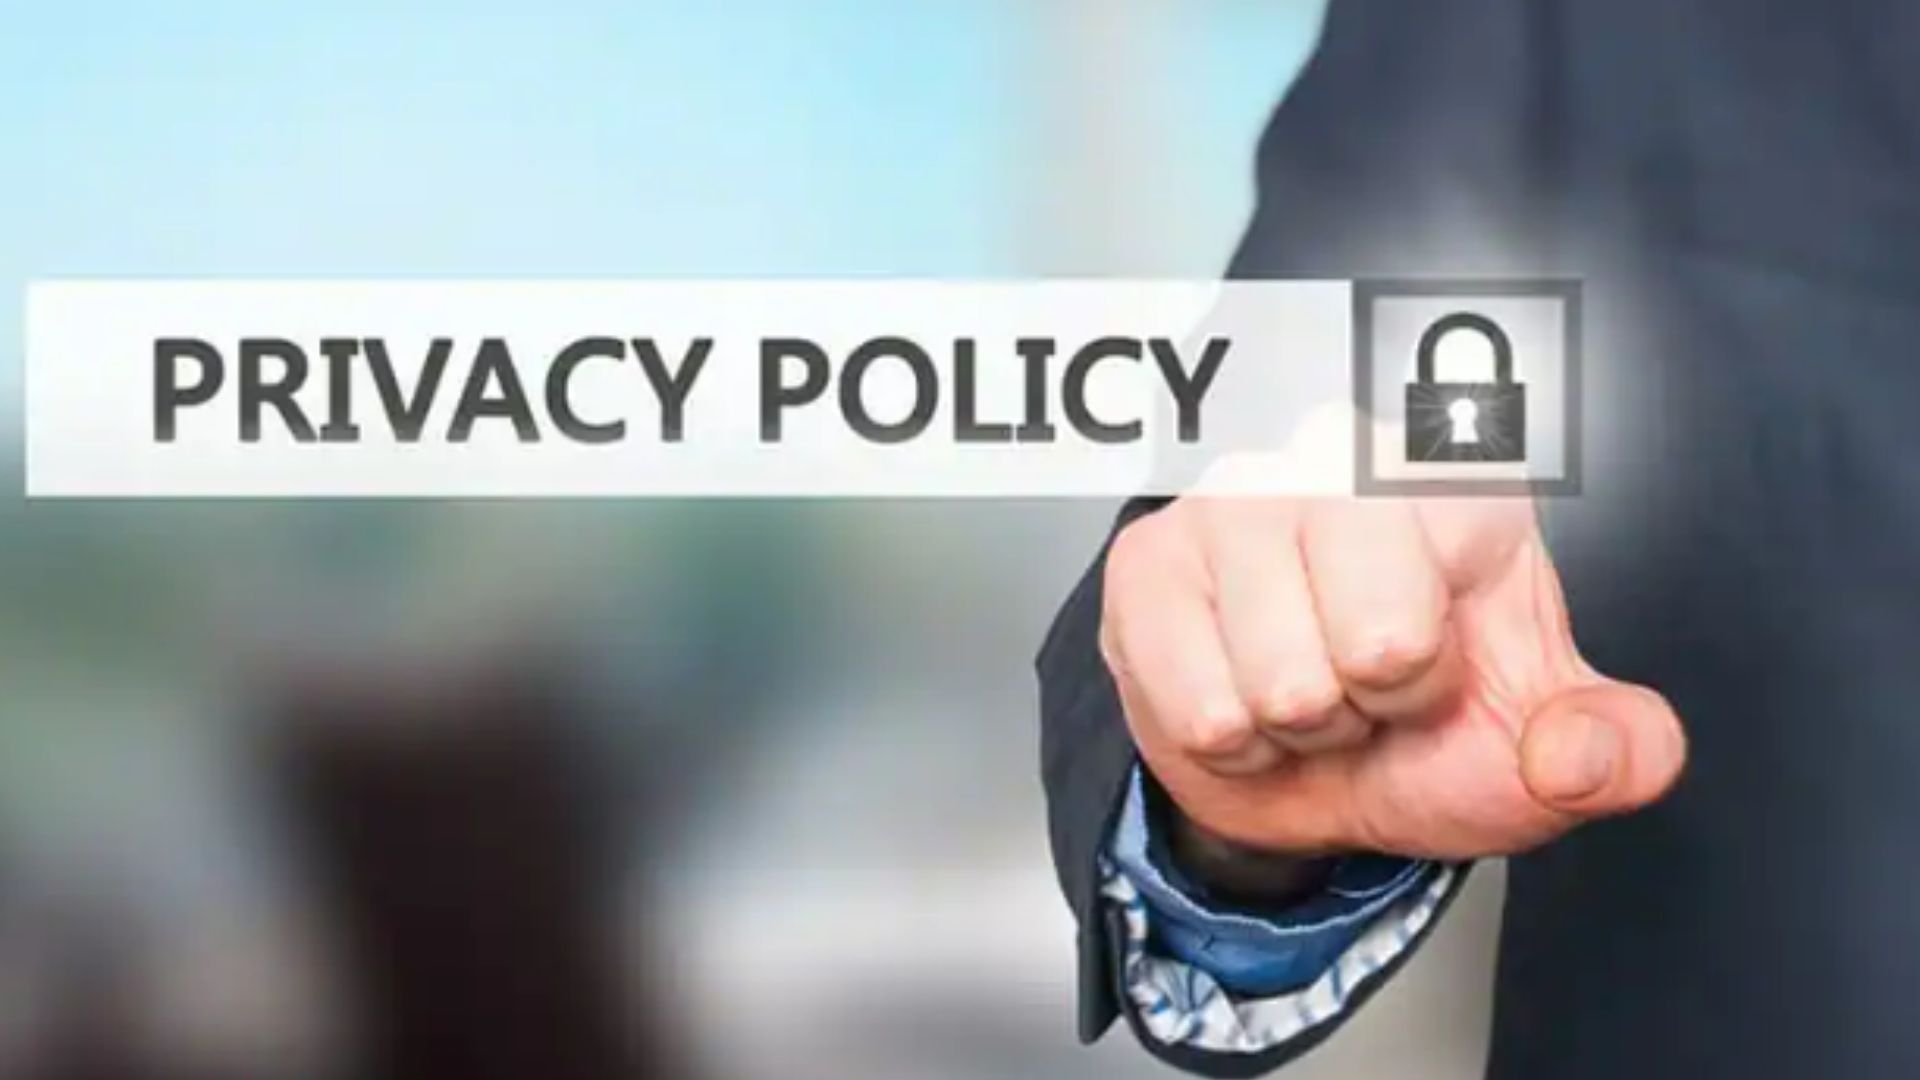 a man wearing a black suit pointing at a card written privacy policy 